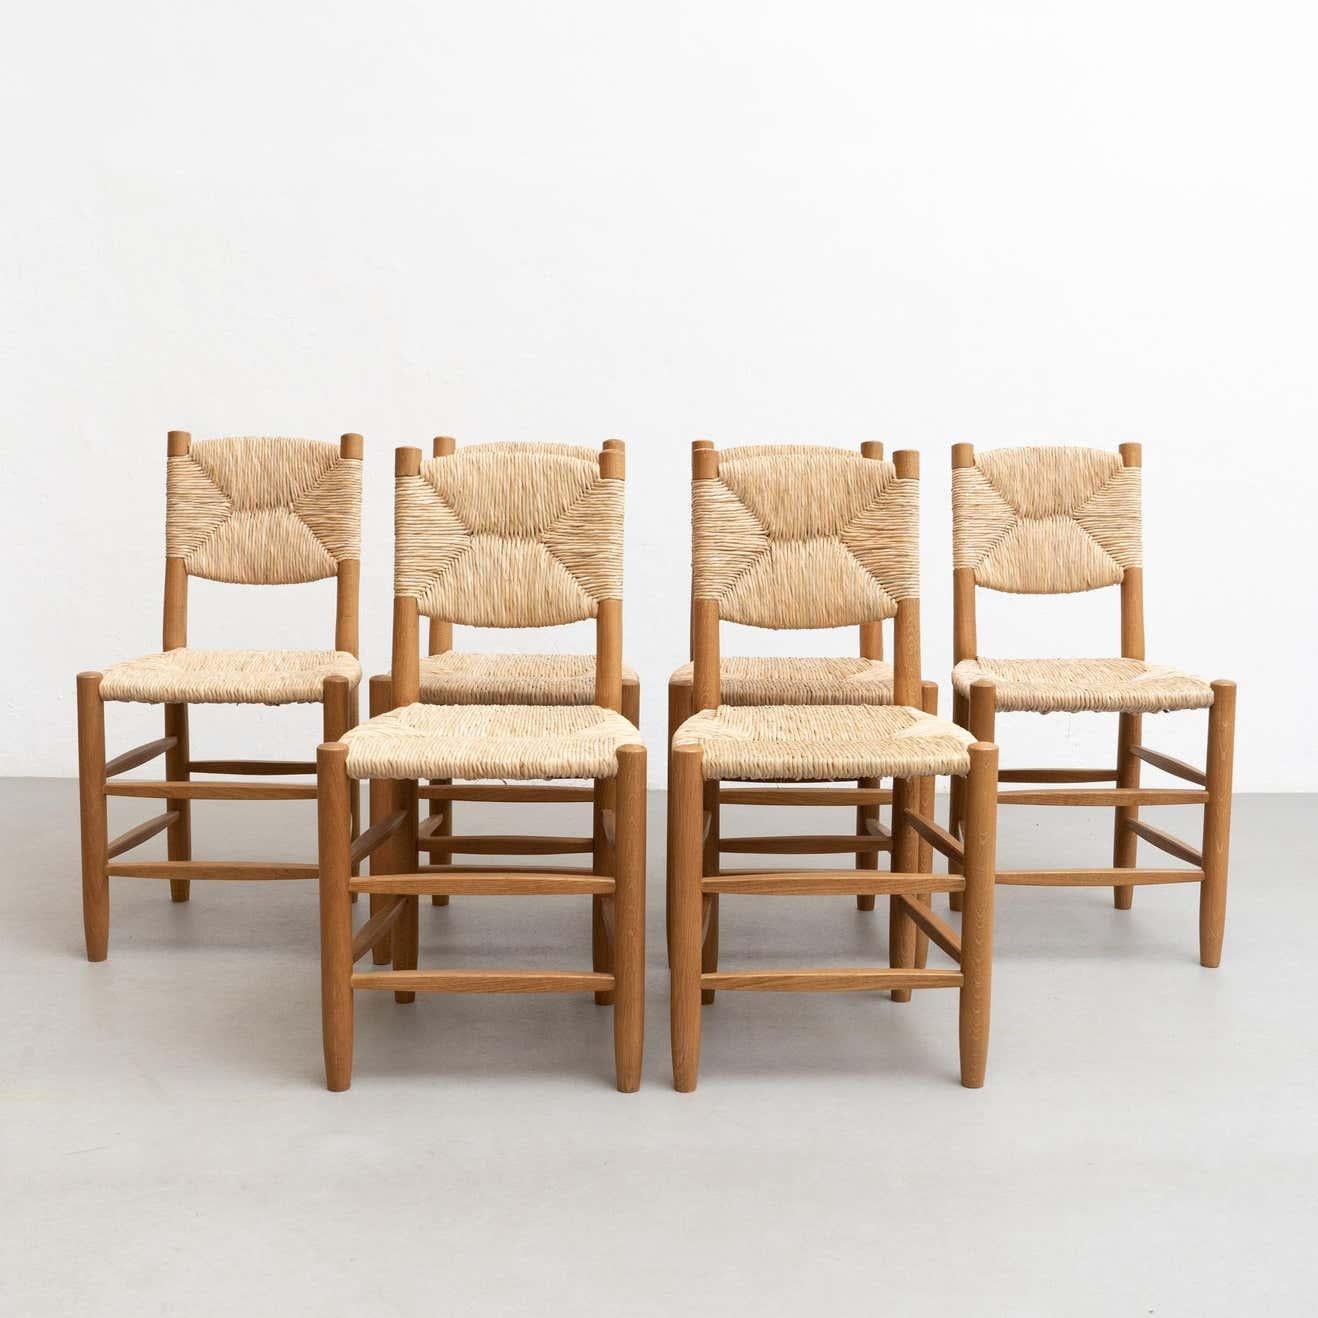 Set of 8 chairs designed in the style of Charlotte Perriand. 

Made by unknown manufacturer in France, circa 1980.

In good original condition, with minor wear consistent with age and use, preserving a beautiful patina.

Materials:
wood and